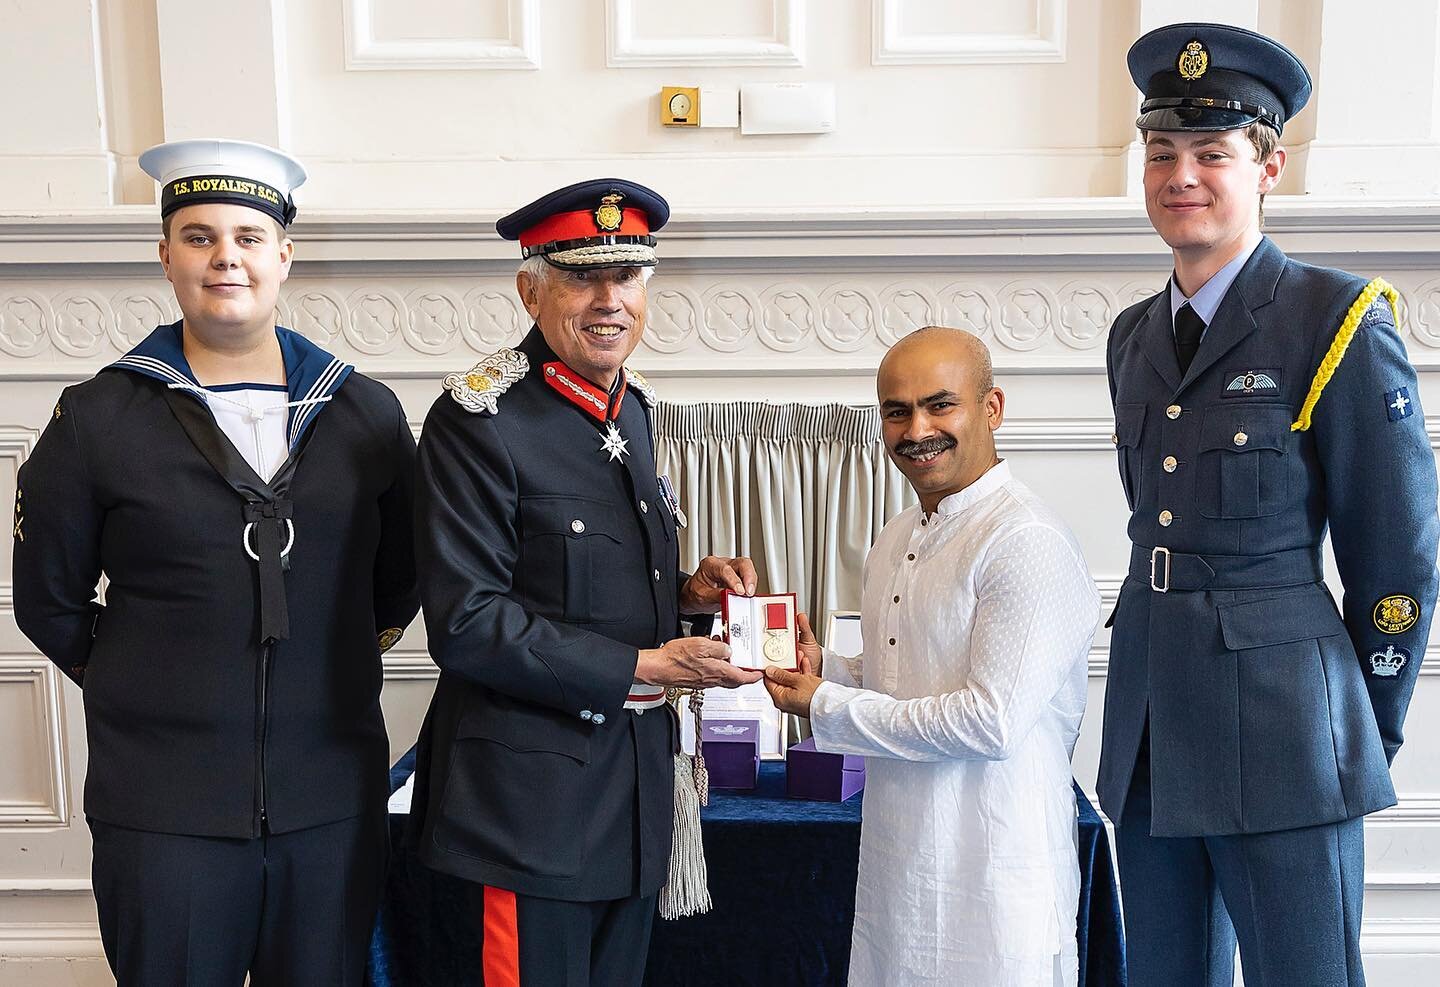 *****Long Post Alert*****

I am delighted to share that the British Empire Medal award ceremony has now taken place and I feel very grateful to have been able to accept the award on behalf of the Iyengar Yoga Community and all of you who made it poss